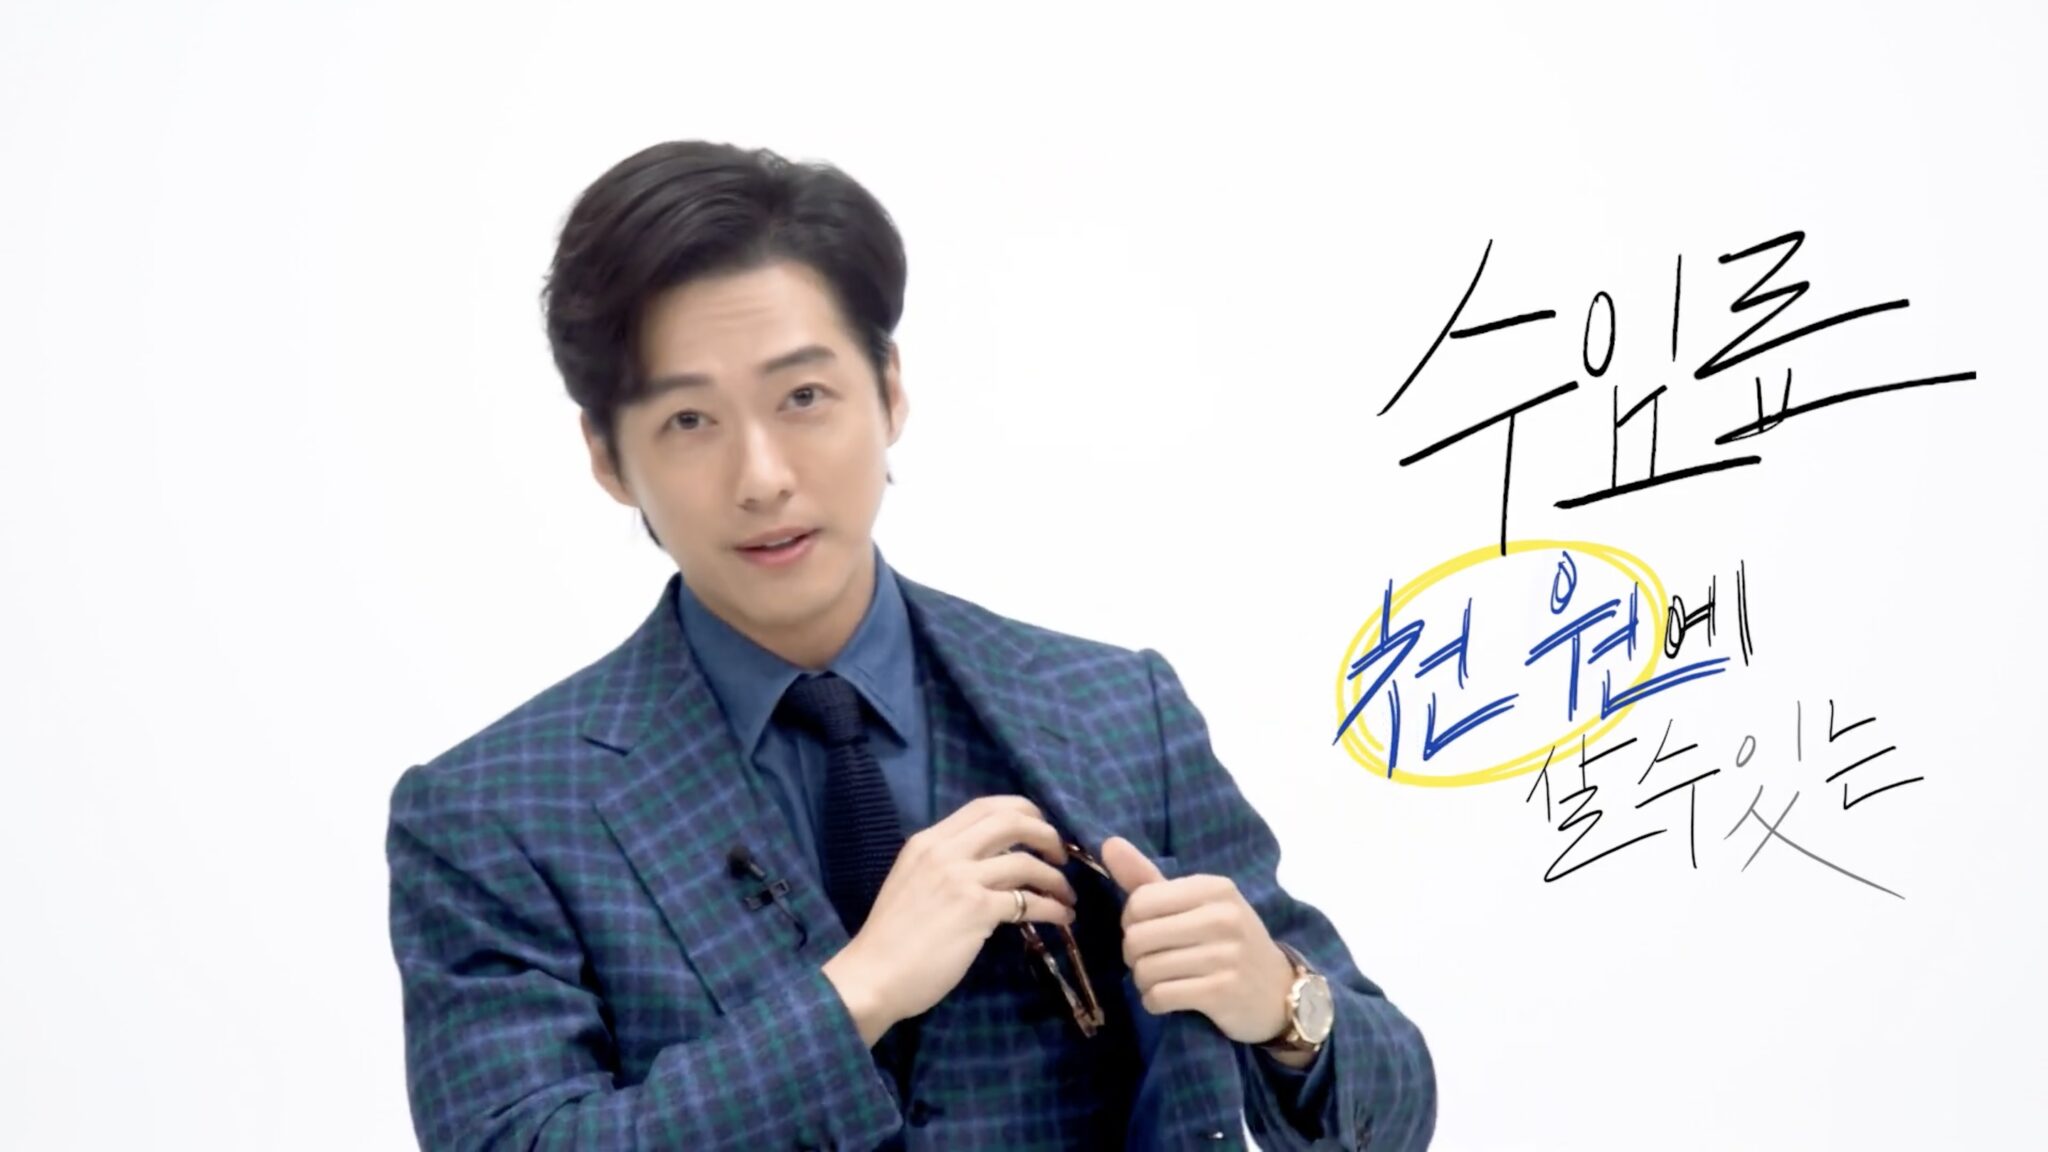 Namgoong Min is a value-for-money attorney in One Dollar Lawyer